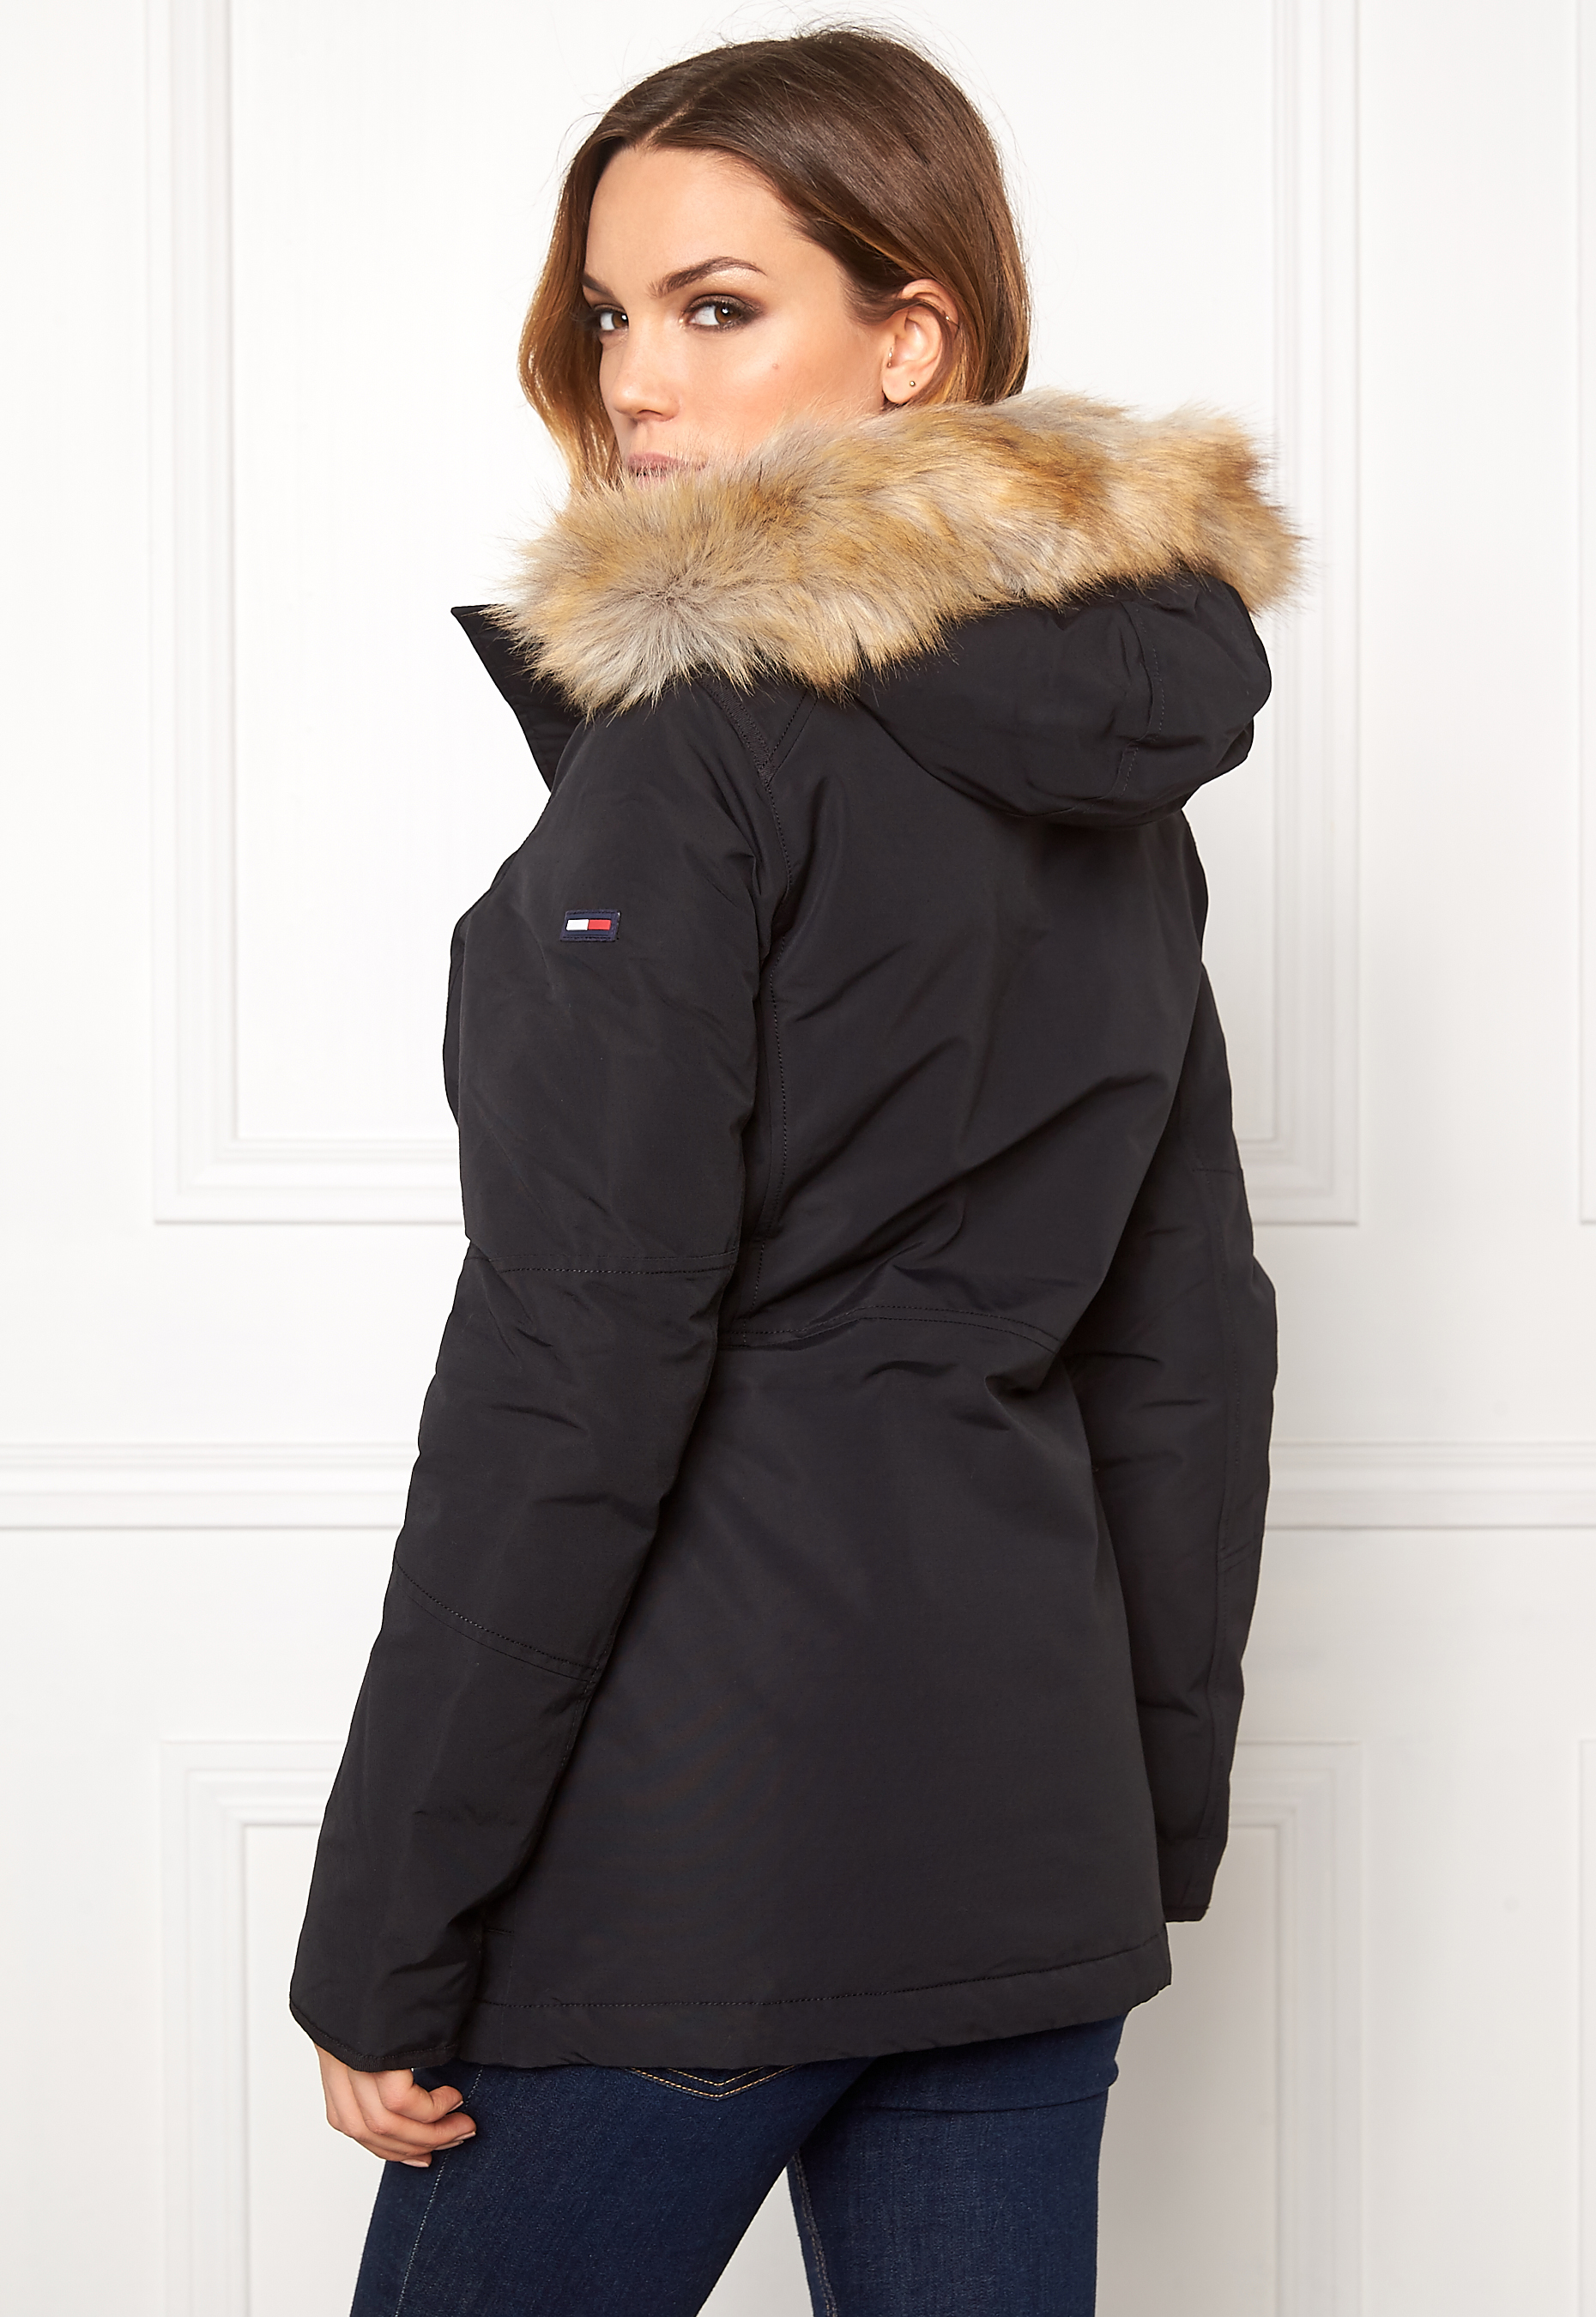 tommy jeans technical down jacket